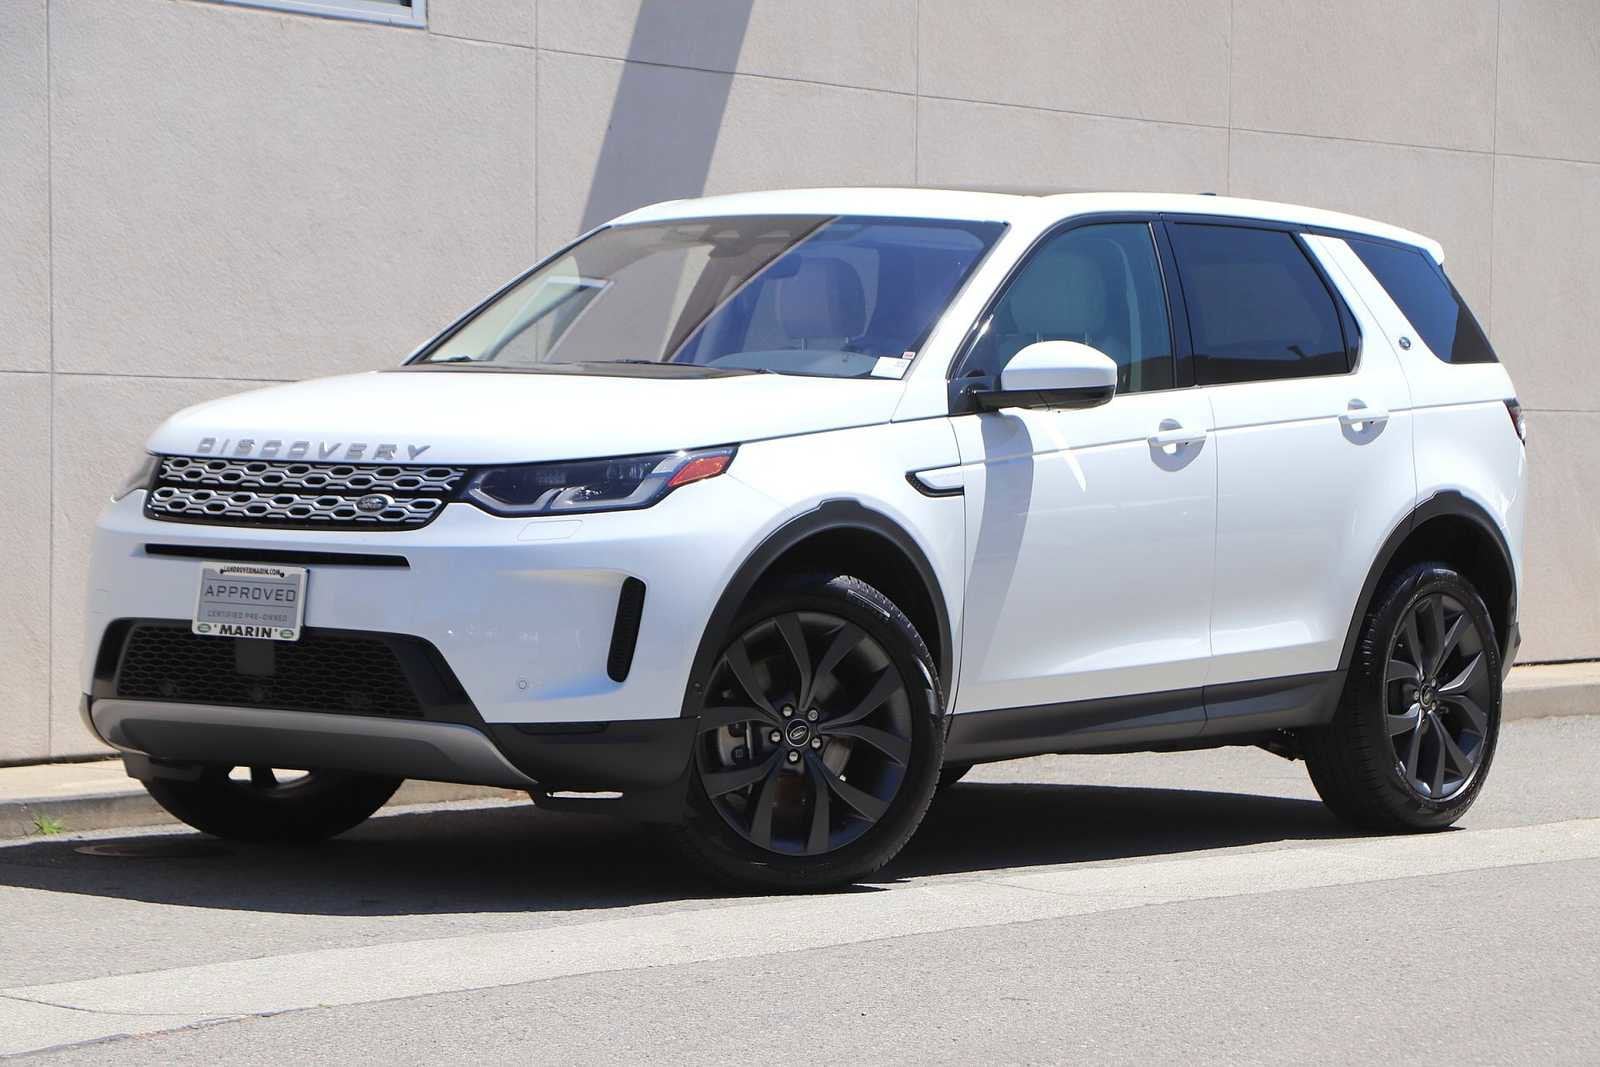 Used 2021 Land Rover Discovery Sport For Sale at Land Rover Marin | VIN:  SALCP2FX0MH897376